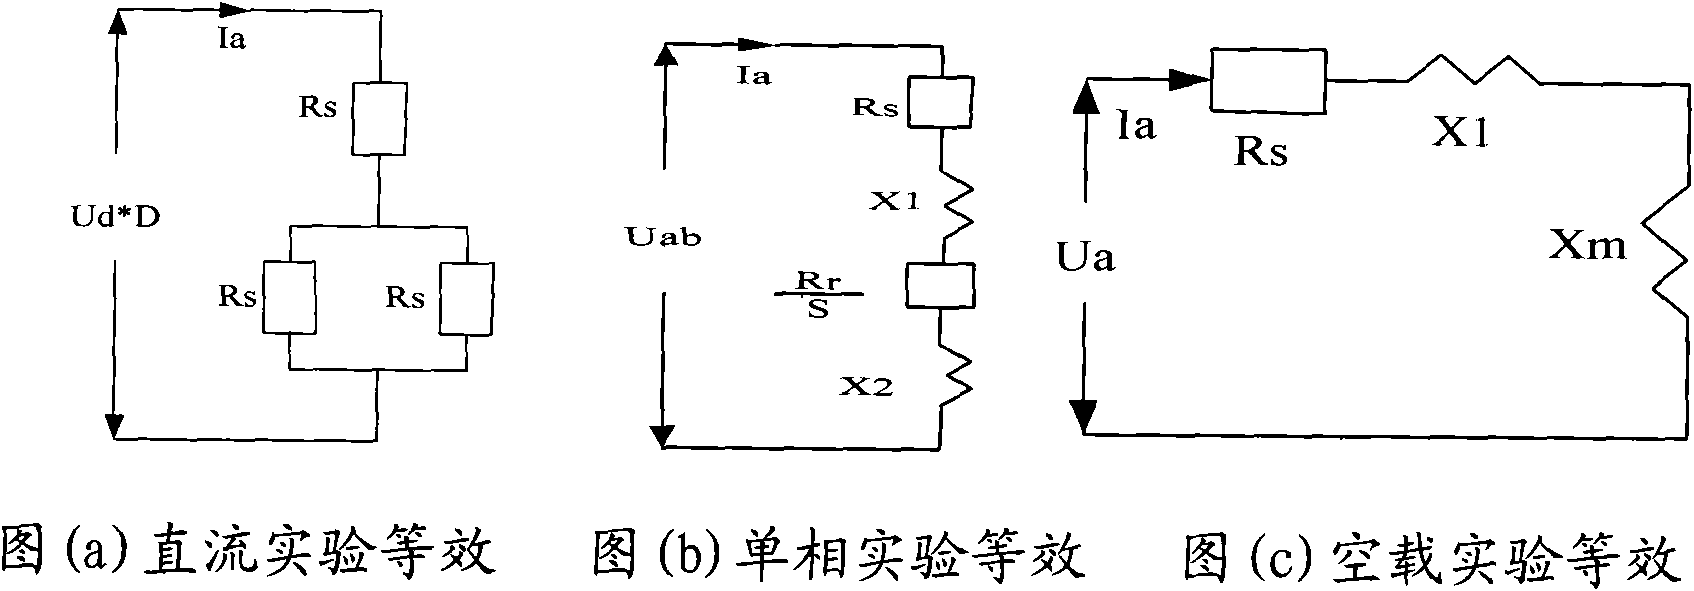 Alternating-current asynchronous motor frequency converter without speed sensor